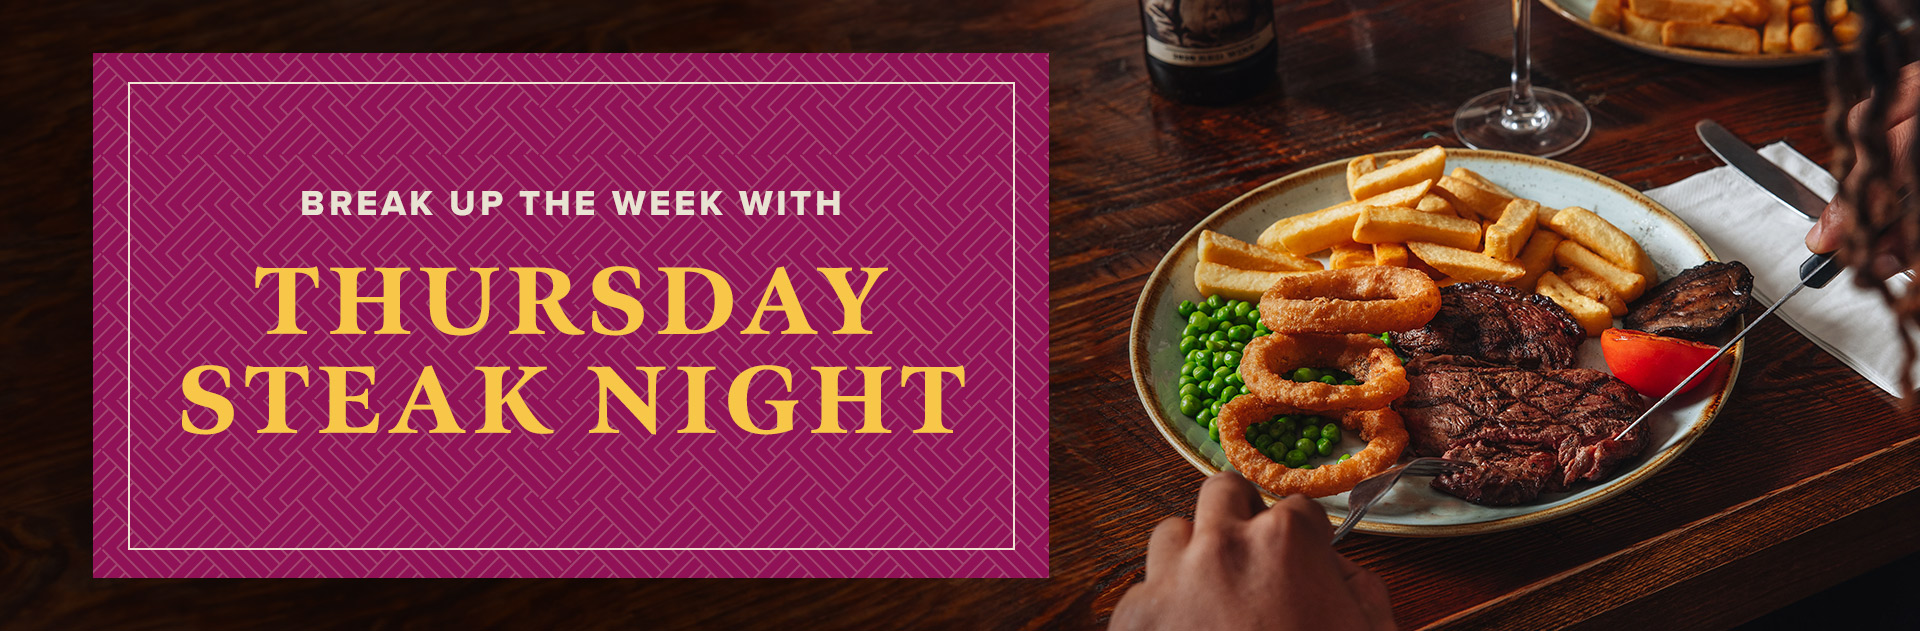 Thursday Steak Night at The Open Arms